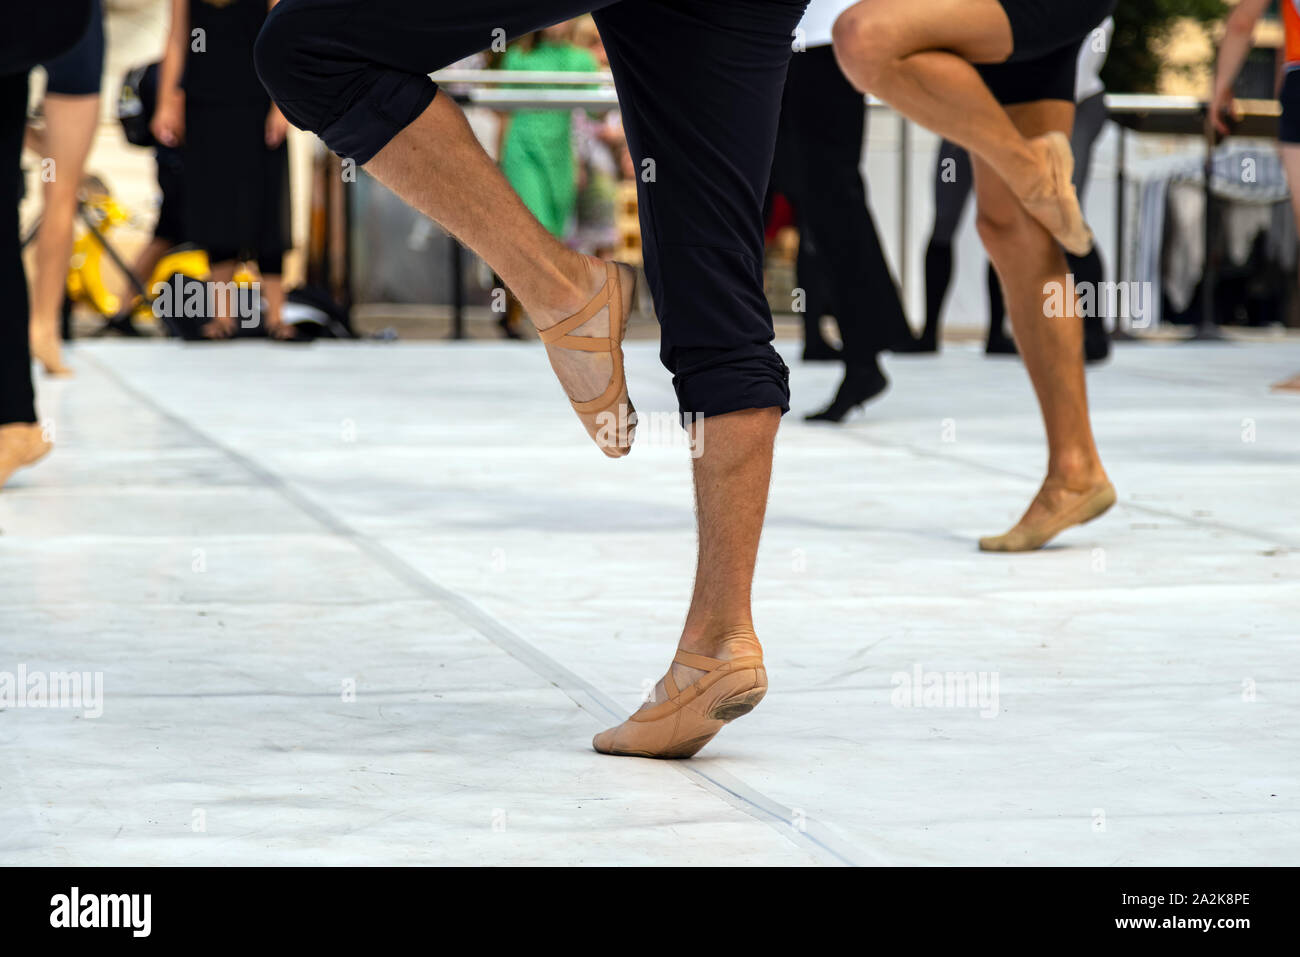 Ballet dancers practicing performance outdoors. Close up of ballerina feet wearing slippers practice moves in ballet class outside Stock Photo